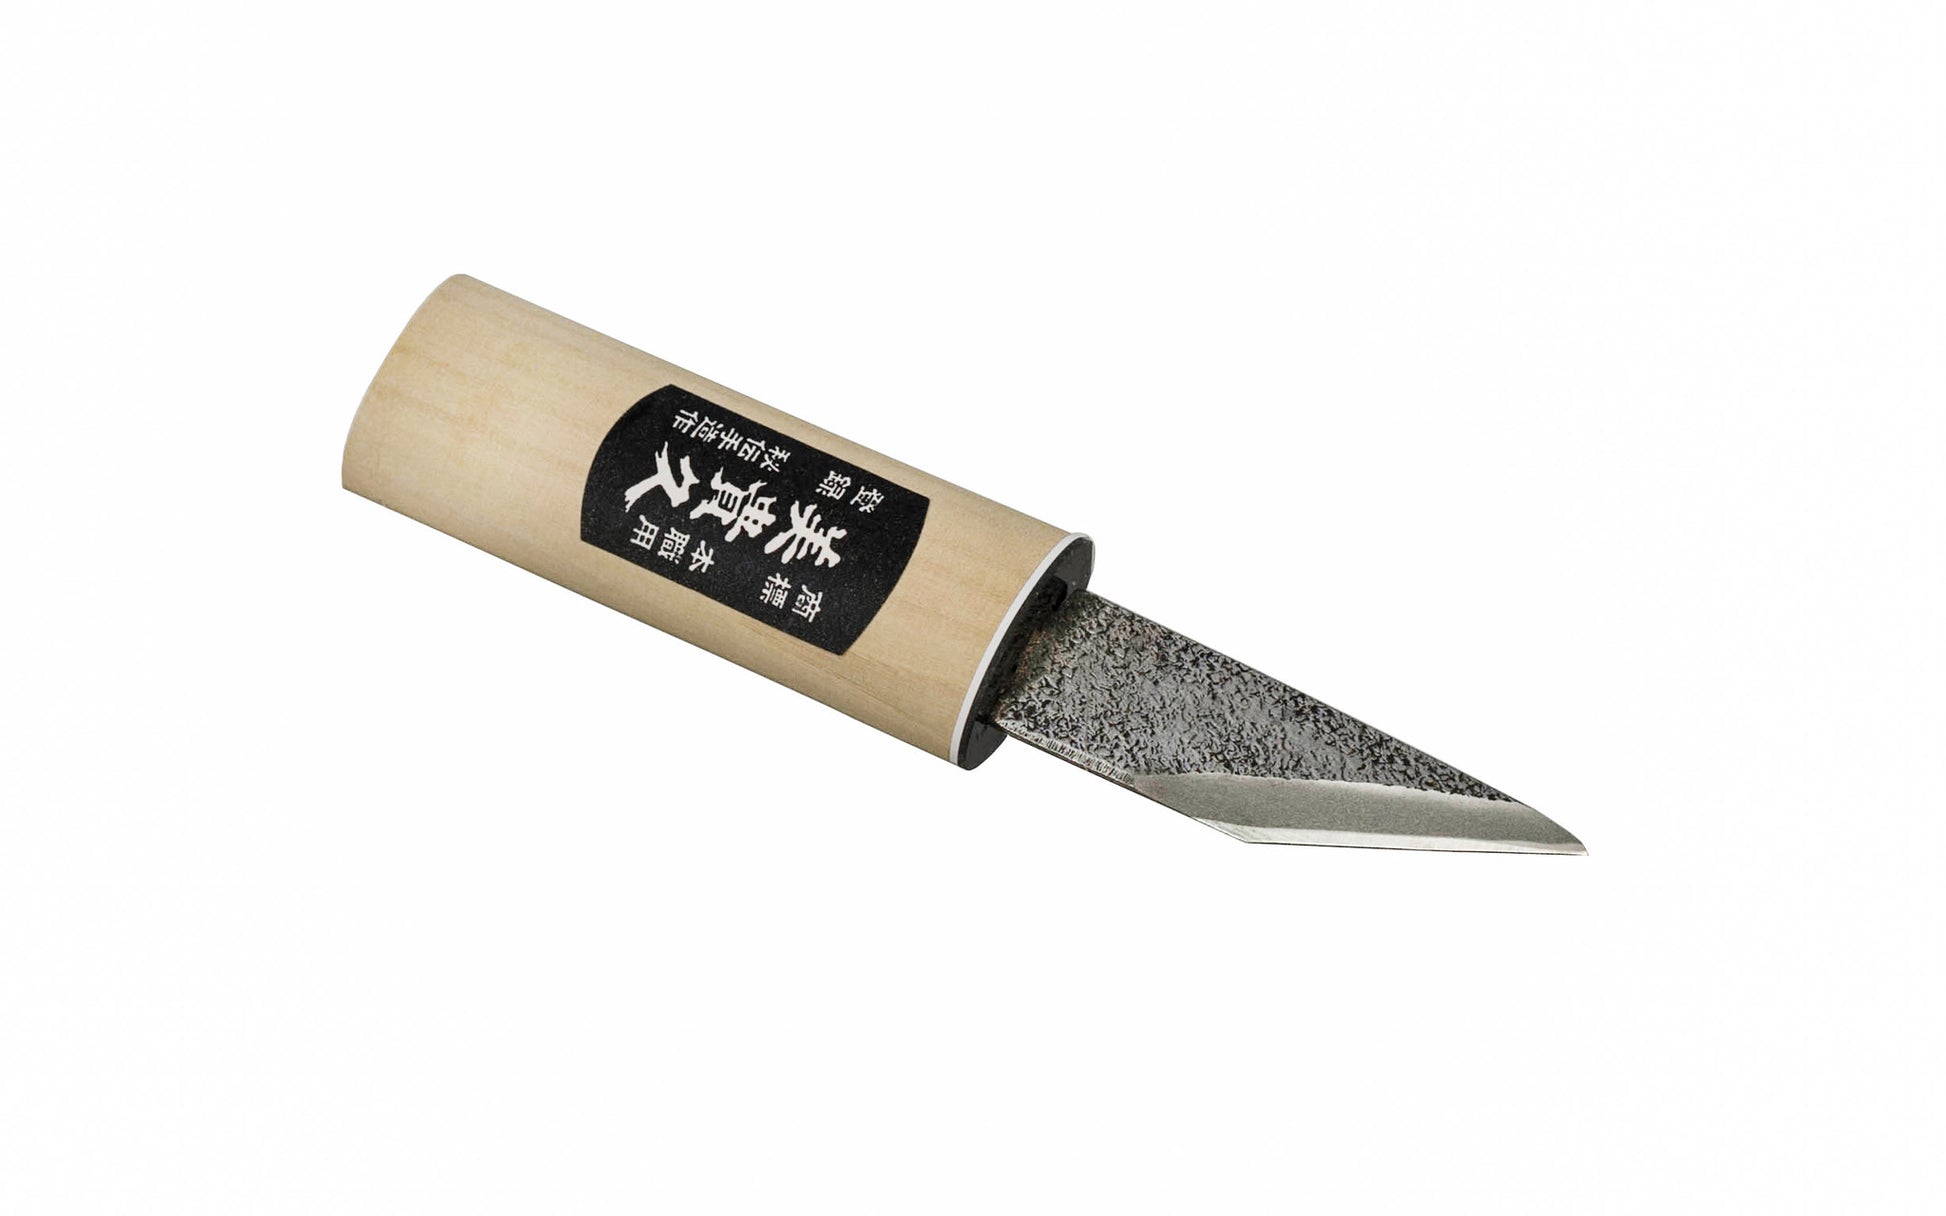 Yokote Japanese Laminated Steel Knife ~ 75 mm ~ Made in Japan · Made of Shirogami White 1.05-1.15% high carbon steel ~ Very pure steel hardened to 64HRC~ Right hand bevel cutting edge~ Fixed blade into handle